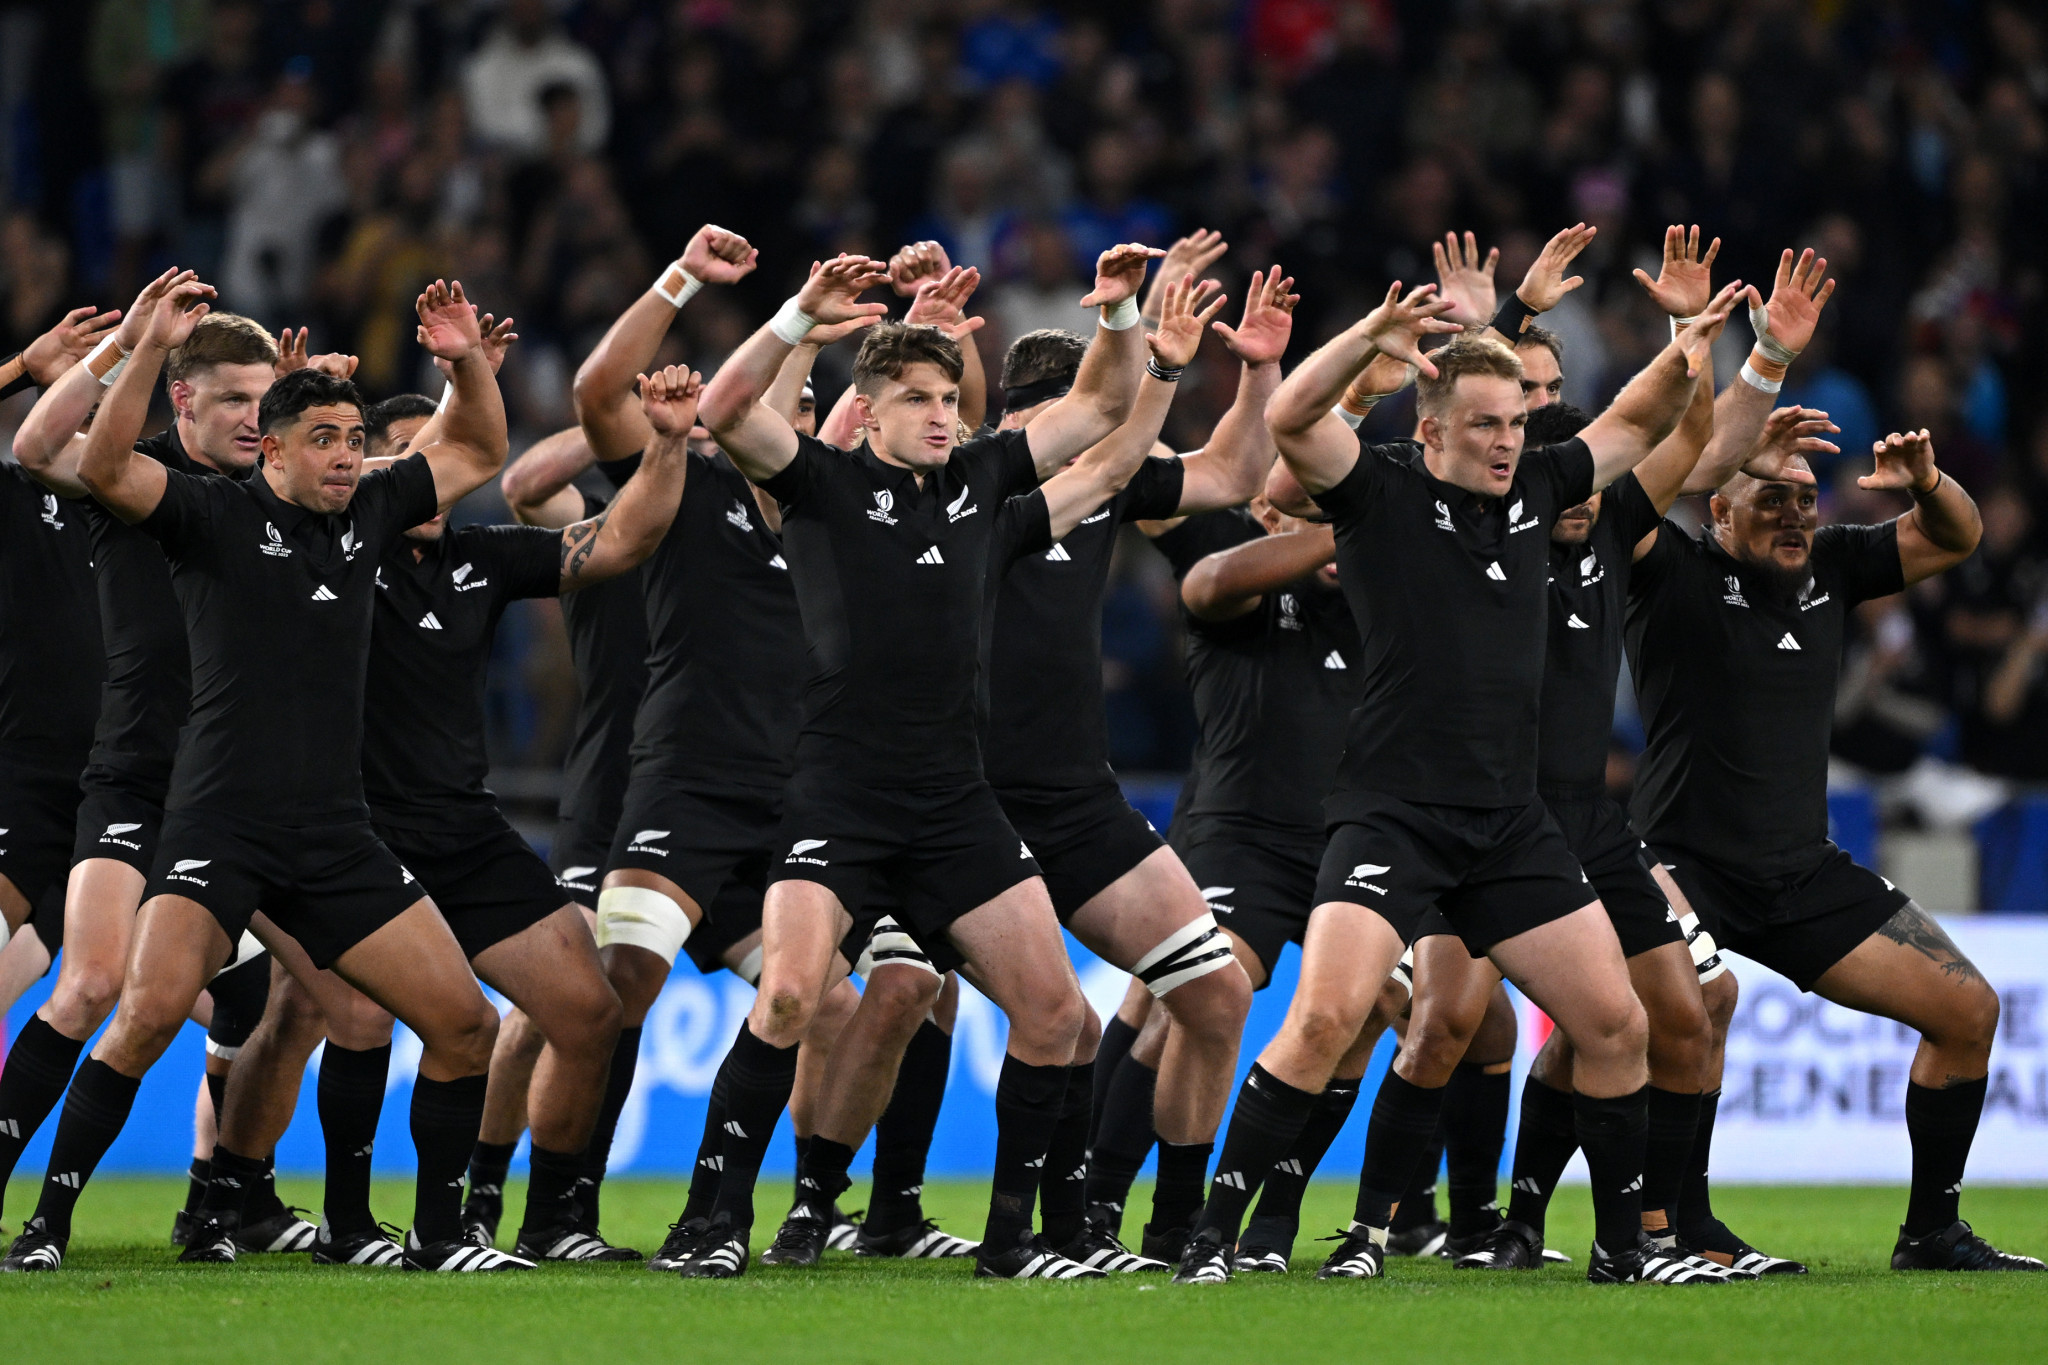 New Zealand again ranked most valuable team brand at Rugby World Cup